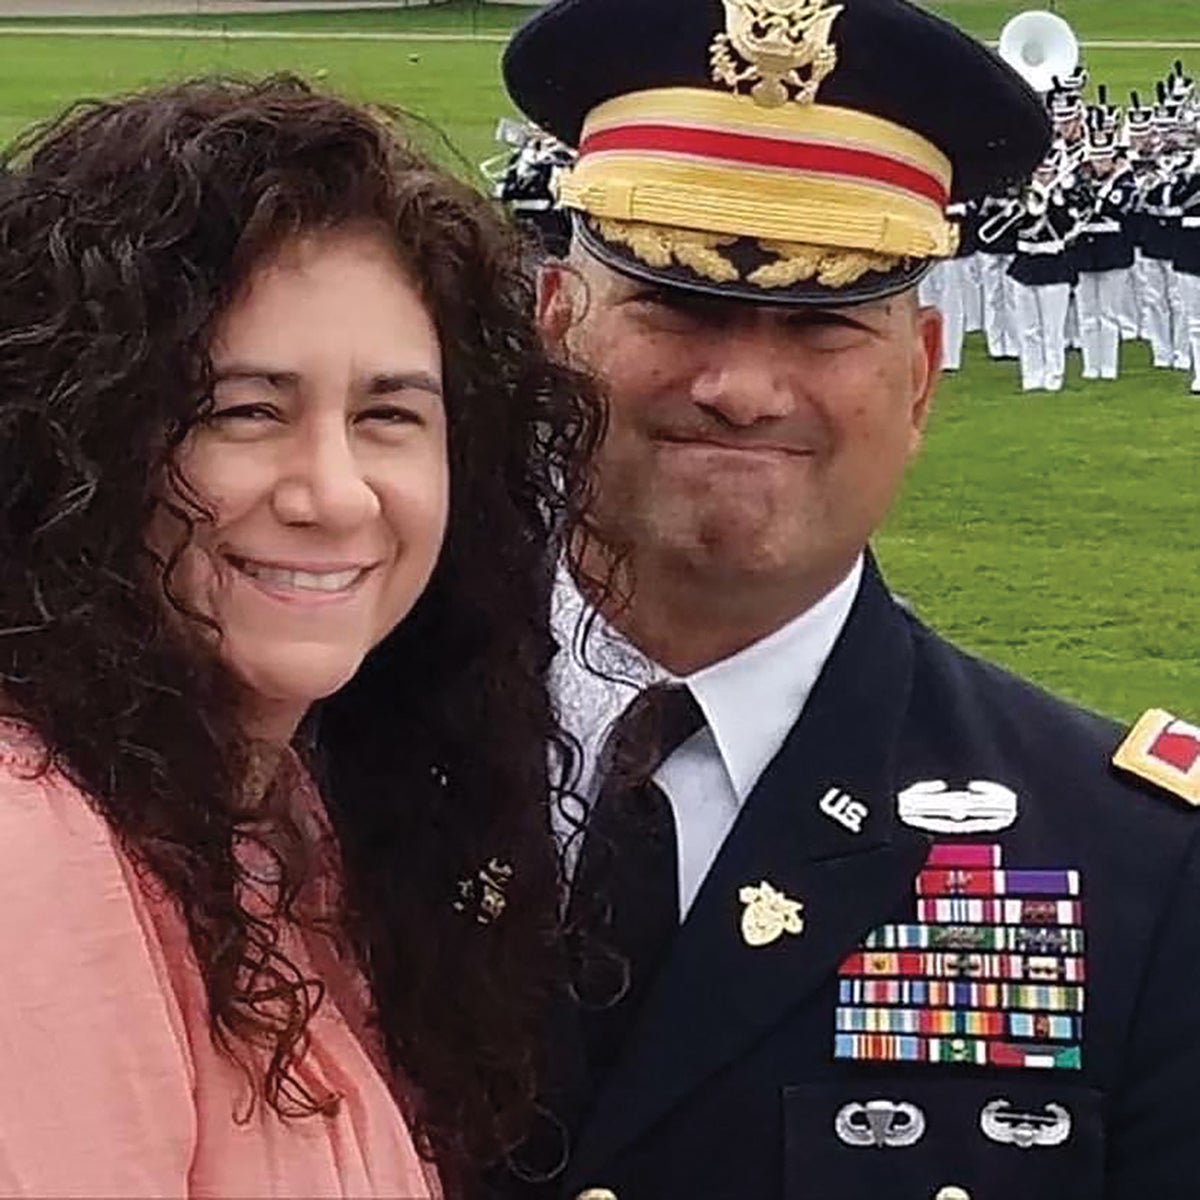 Then-Col. Morales with his wife, Christy, during a 2017 visit to West Point. (Credit: Elaine Lomeli)